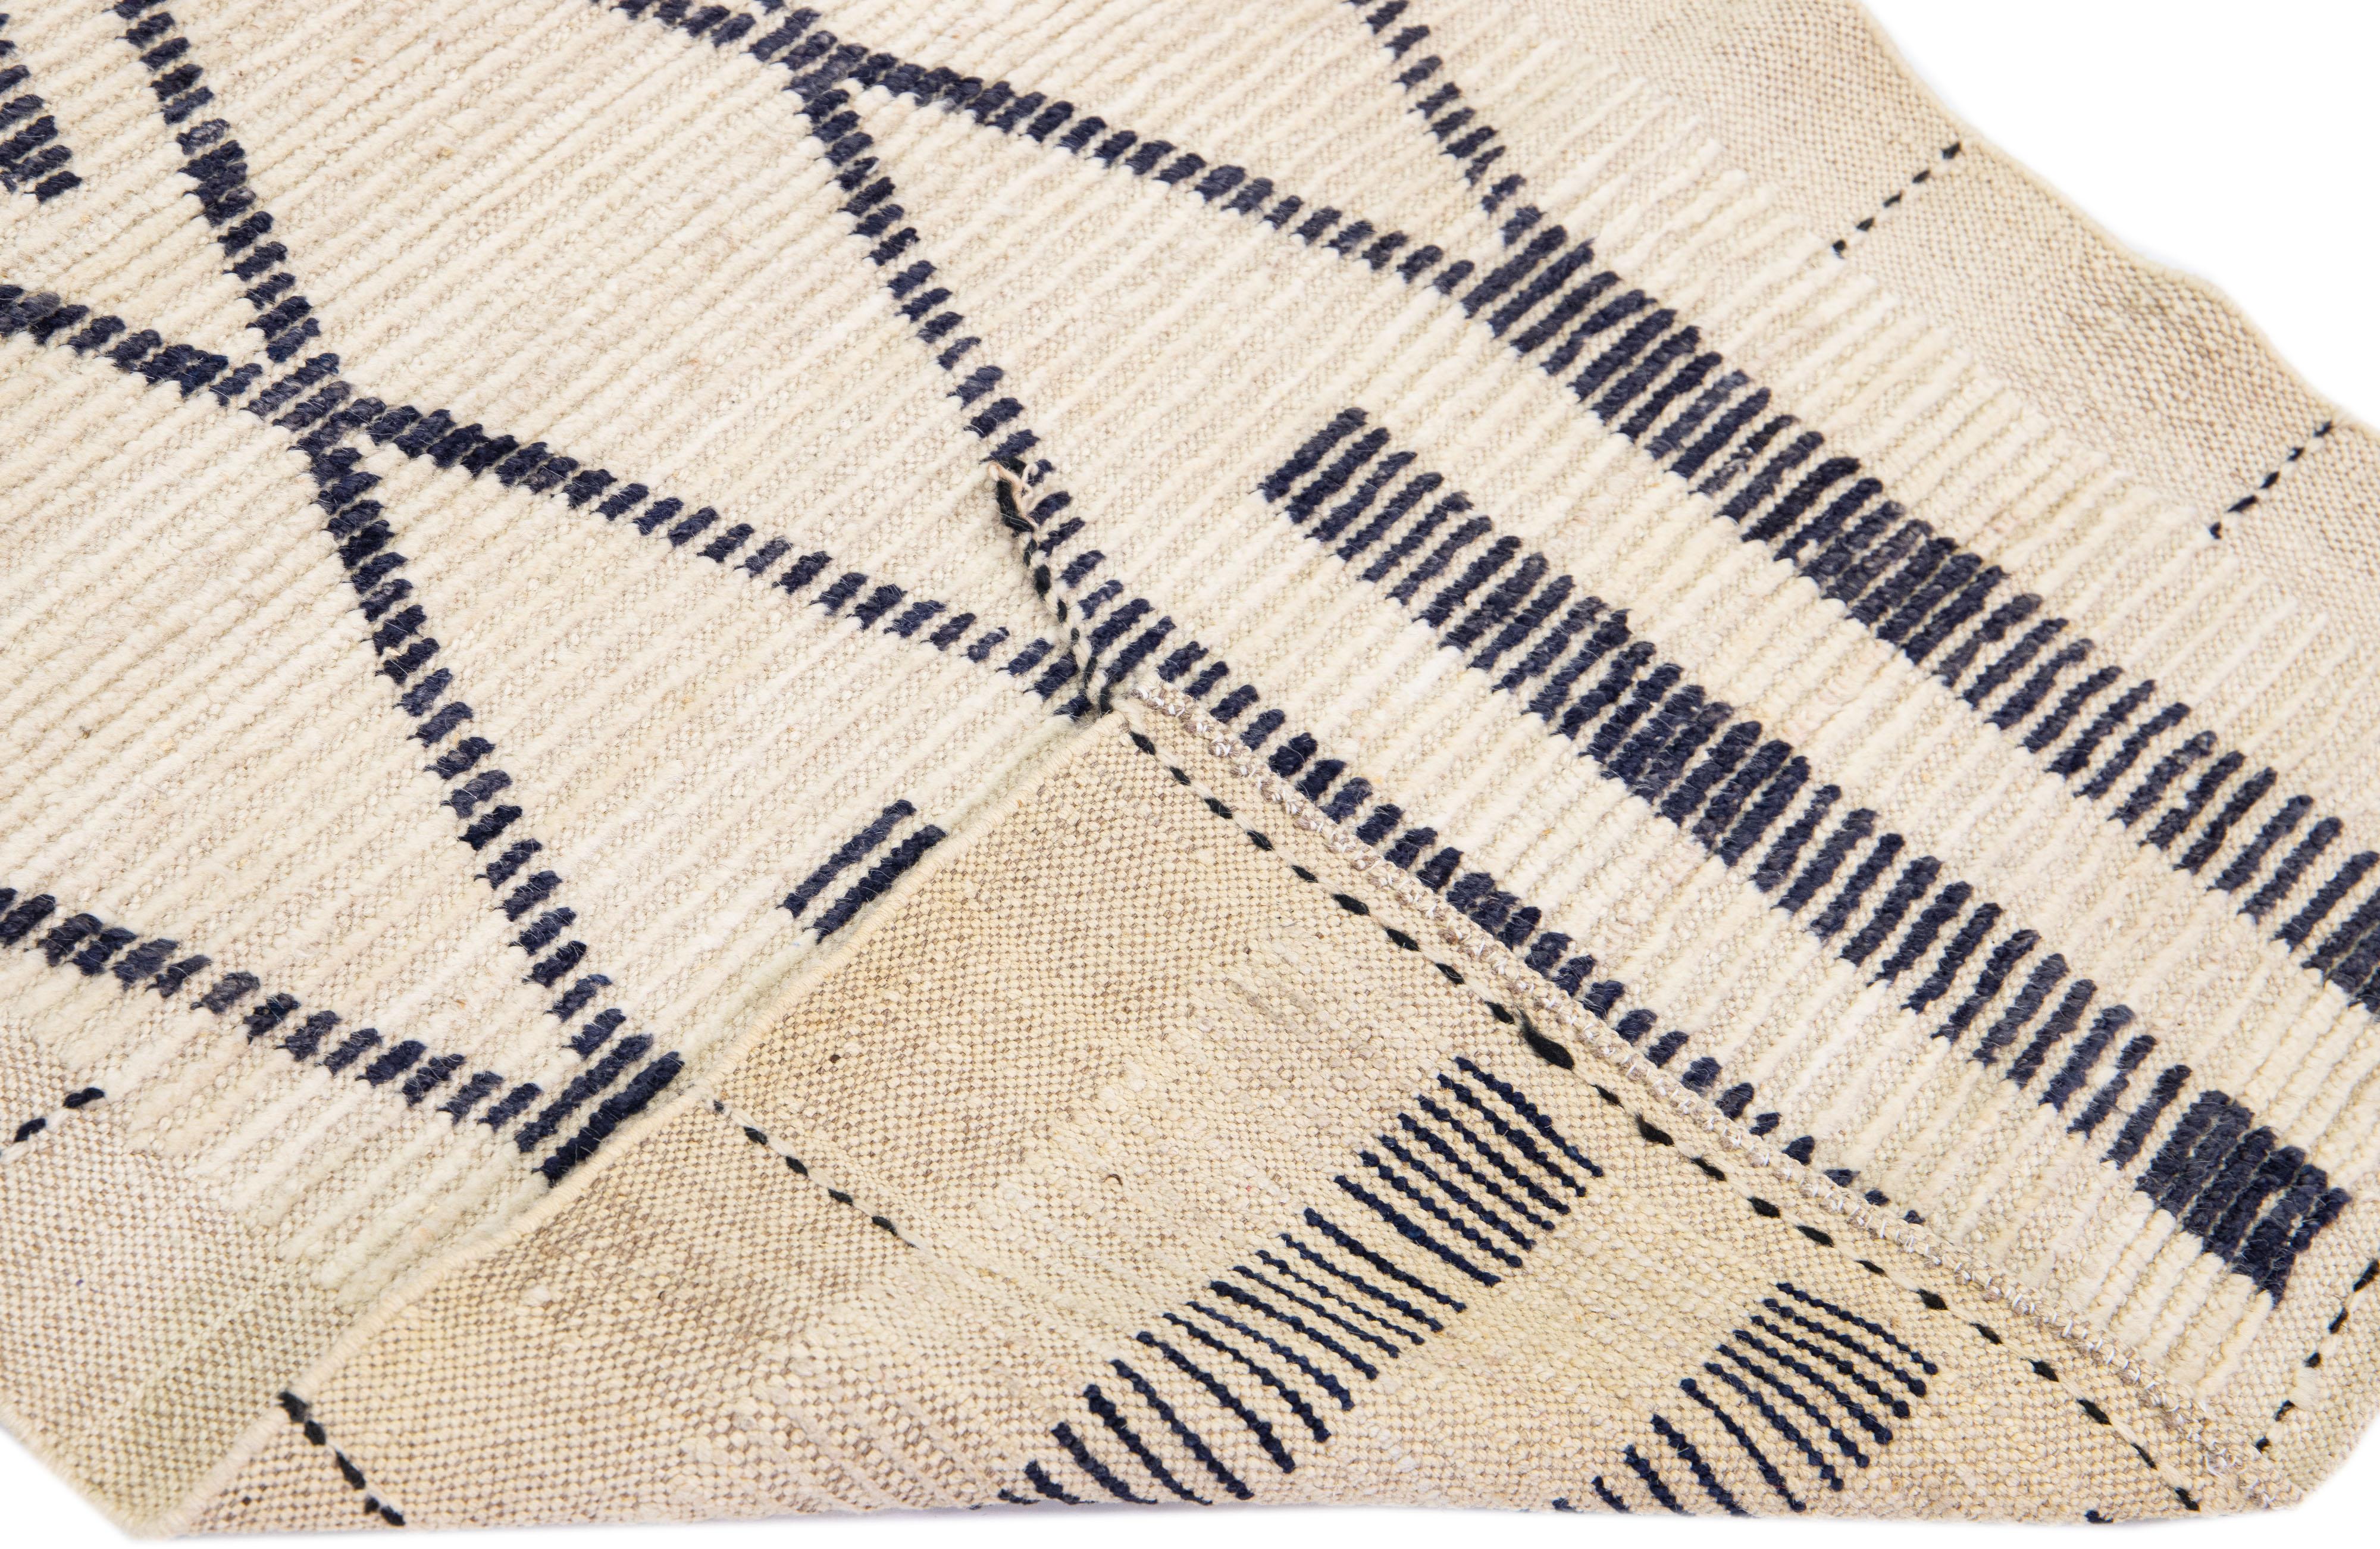 Beautiful Moroccan-style handmade wool rug with a beige field. This Modern rug has blue accents featuring a gorgeous all-over geometric tribal design.

This rug measures: 2'11